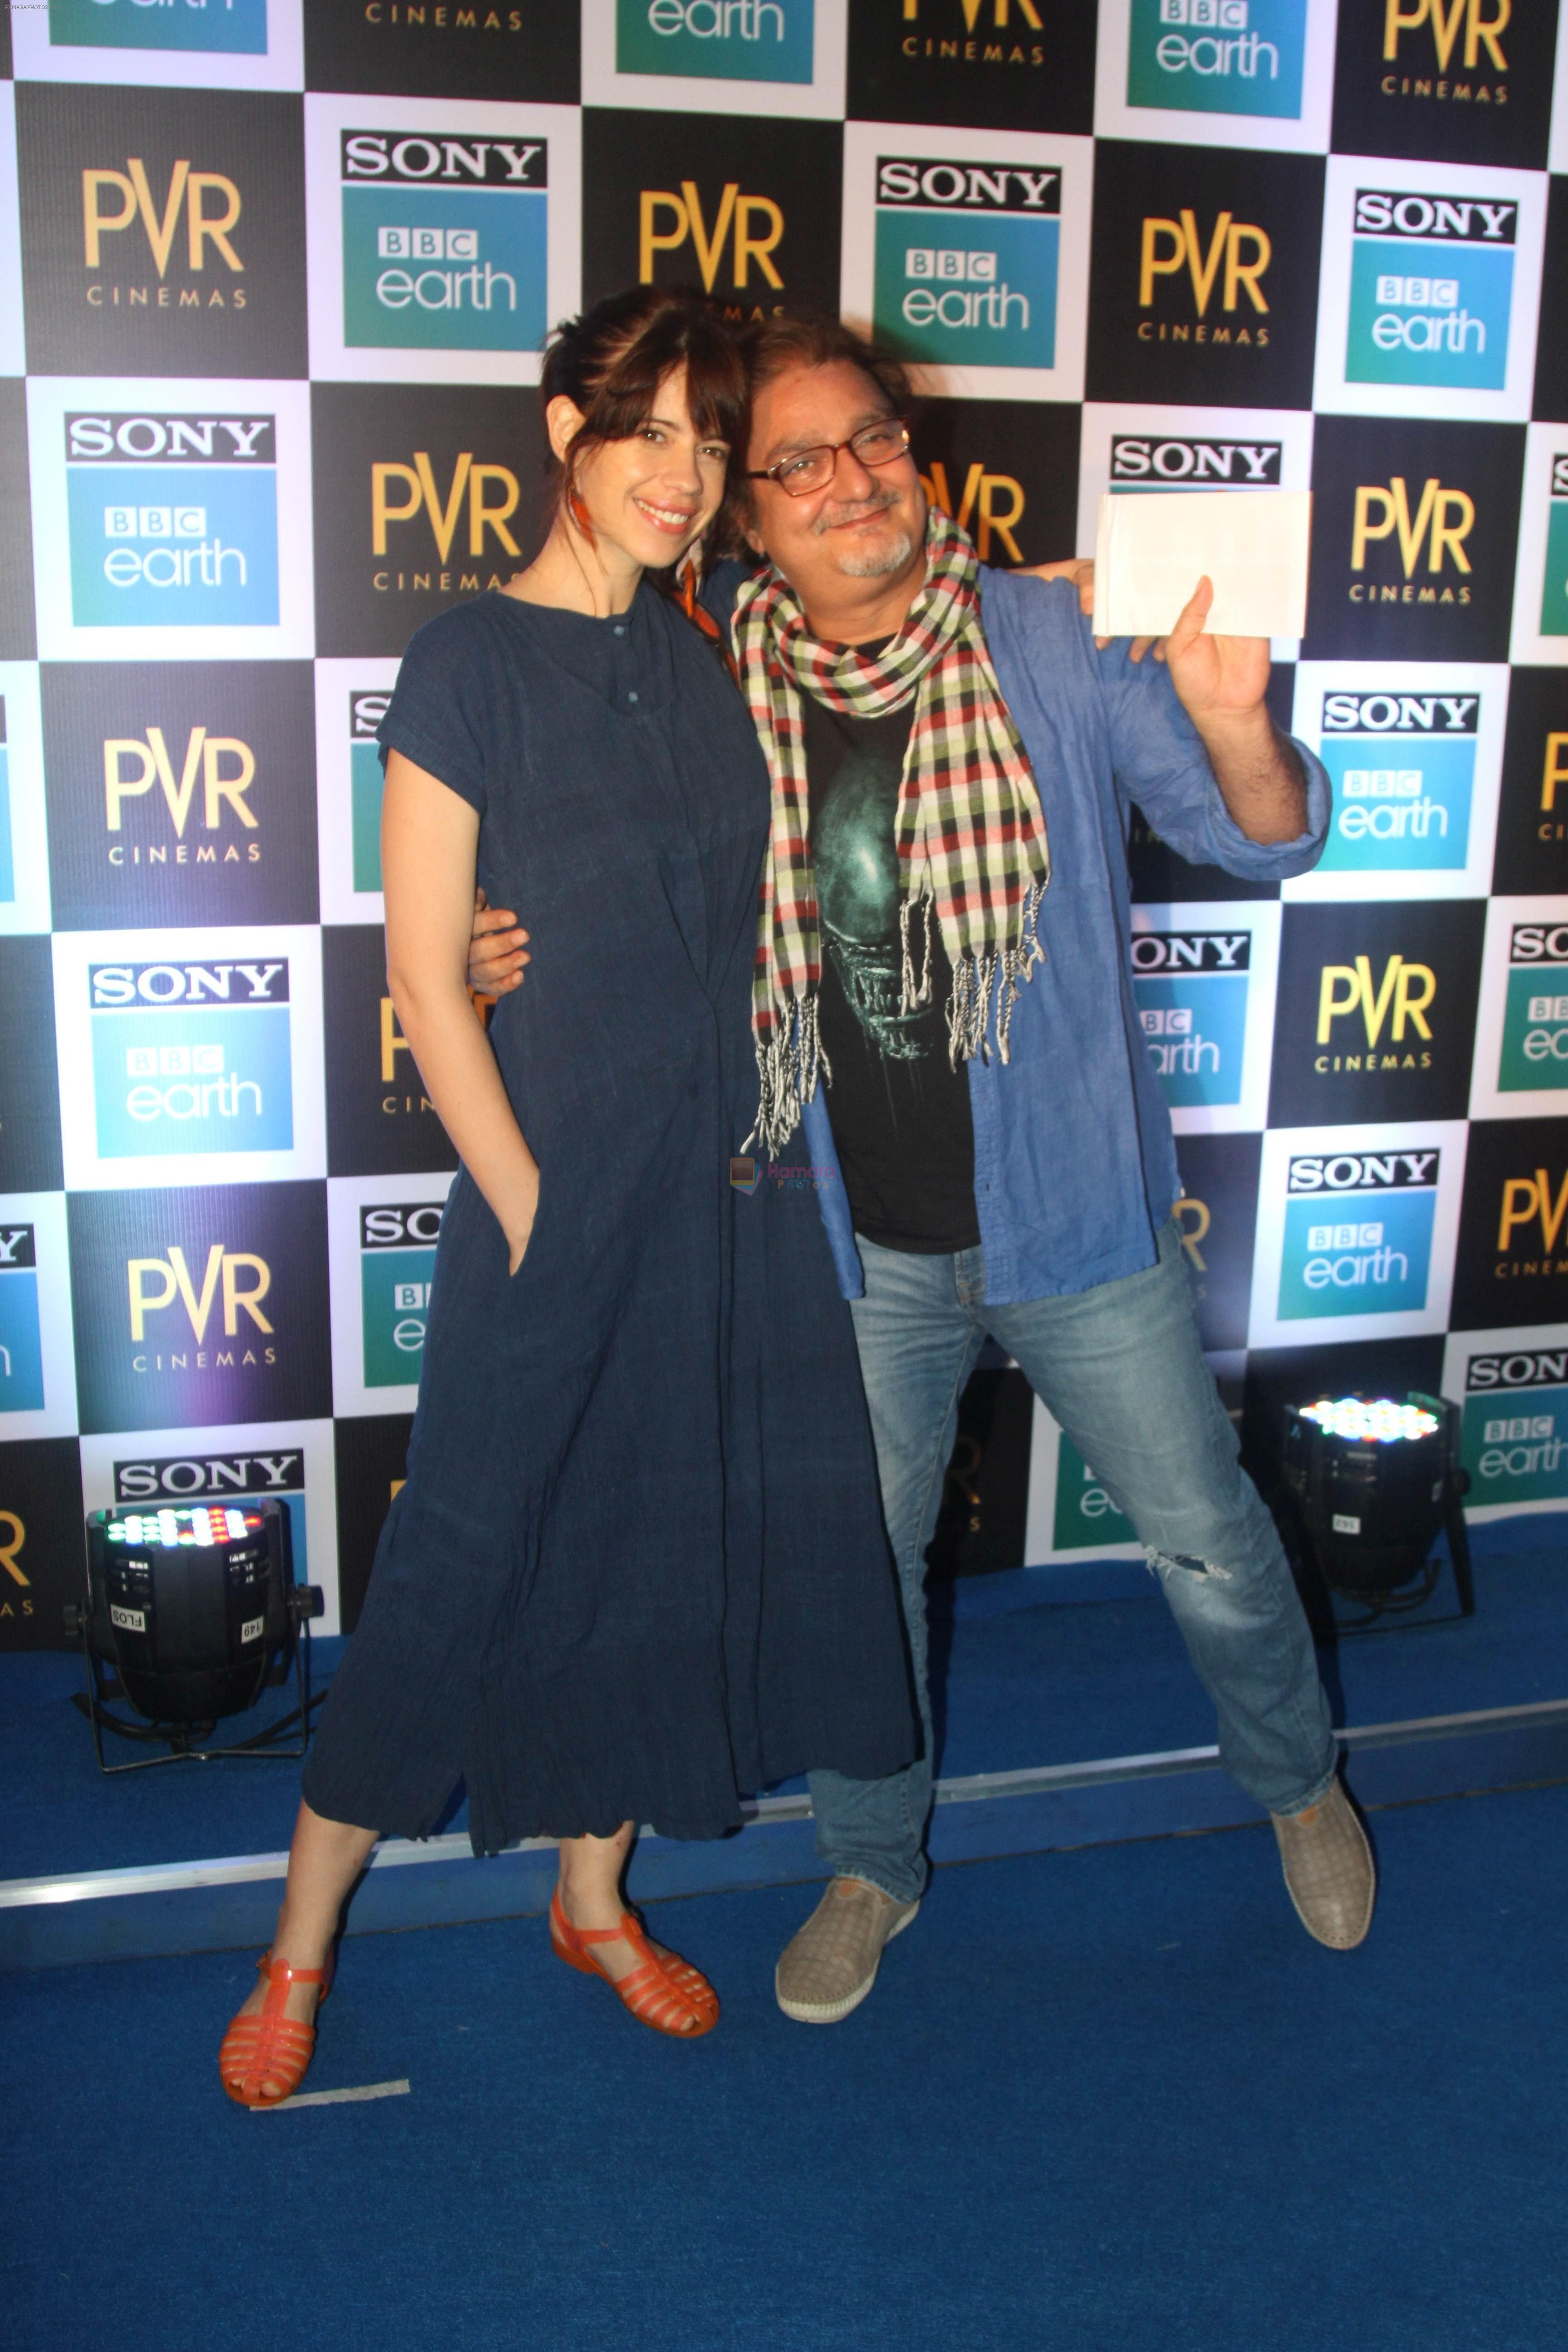 Kalki Koechlin, Vinay Pathak  at the Screening of Sony BBC Earth's film Blue Planet 2 at pvr icon in andheri on 15th May 2018